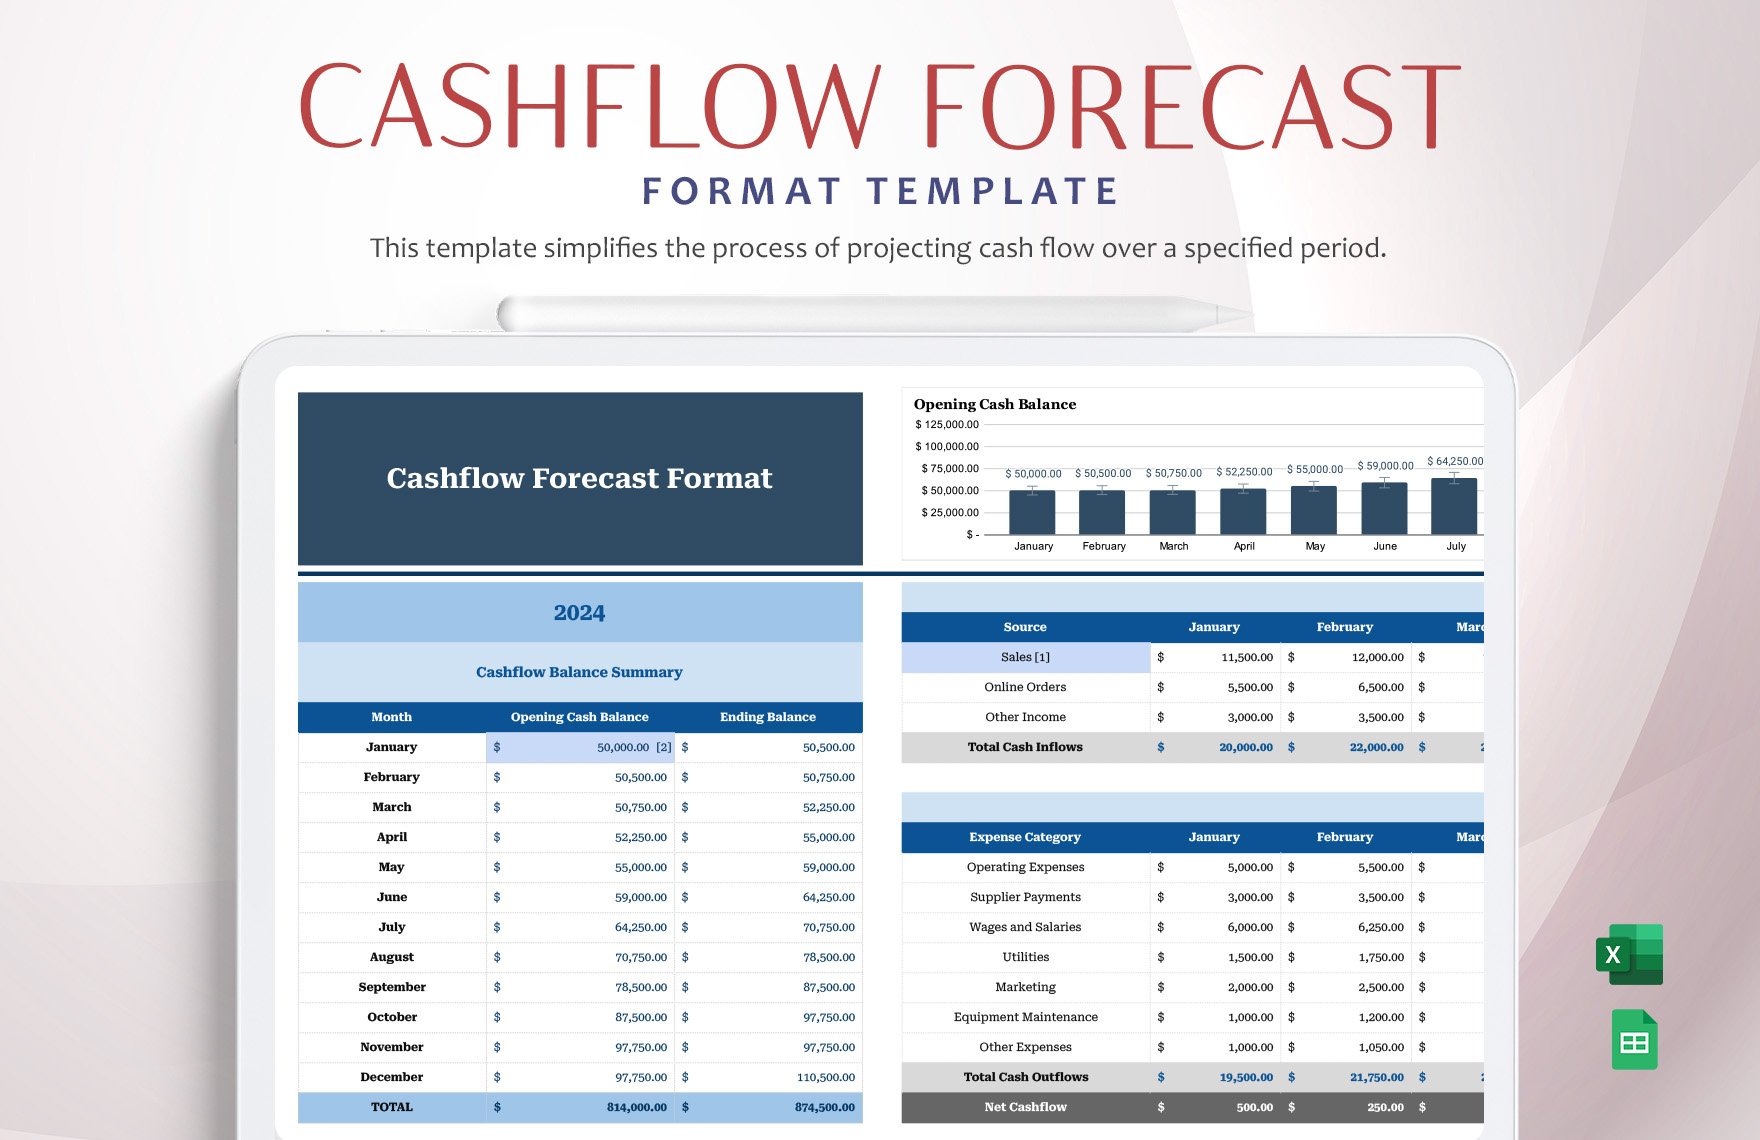 Cashflow Forecast Format Template in Excel, Google Sheets